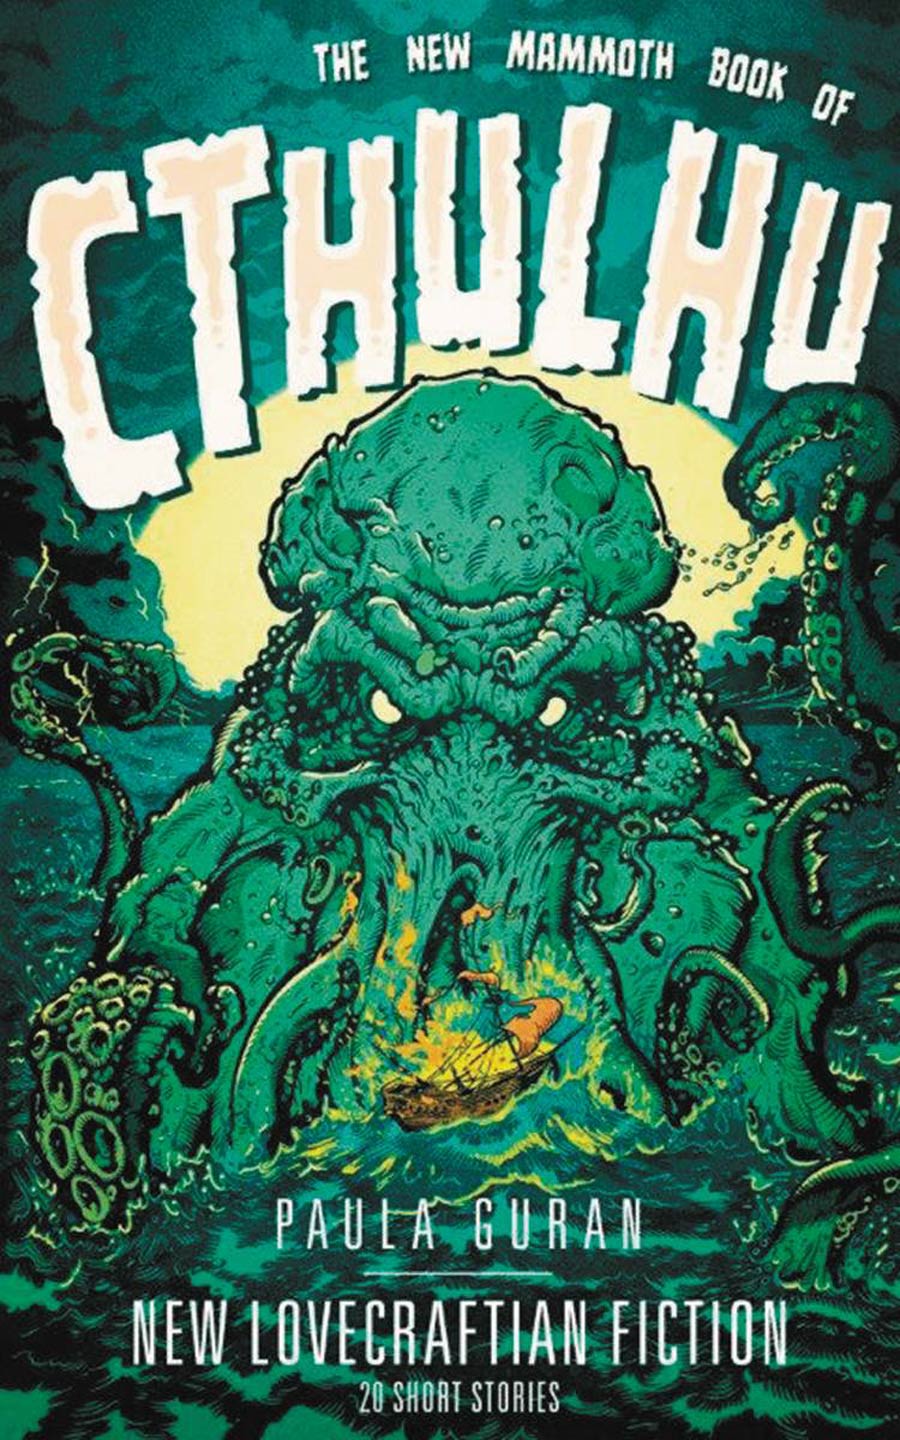 New Mammoth Book Of Cthulhu New Lovecraftian Fiction SC